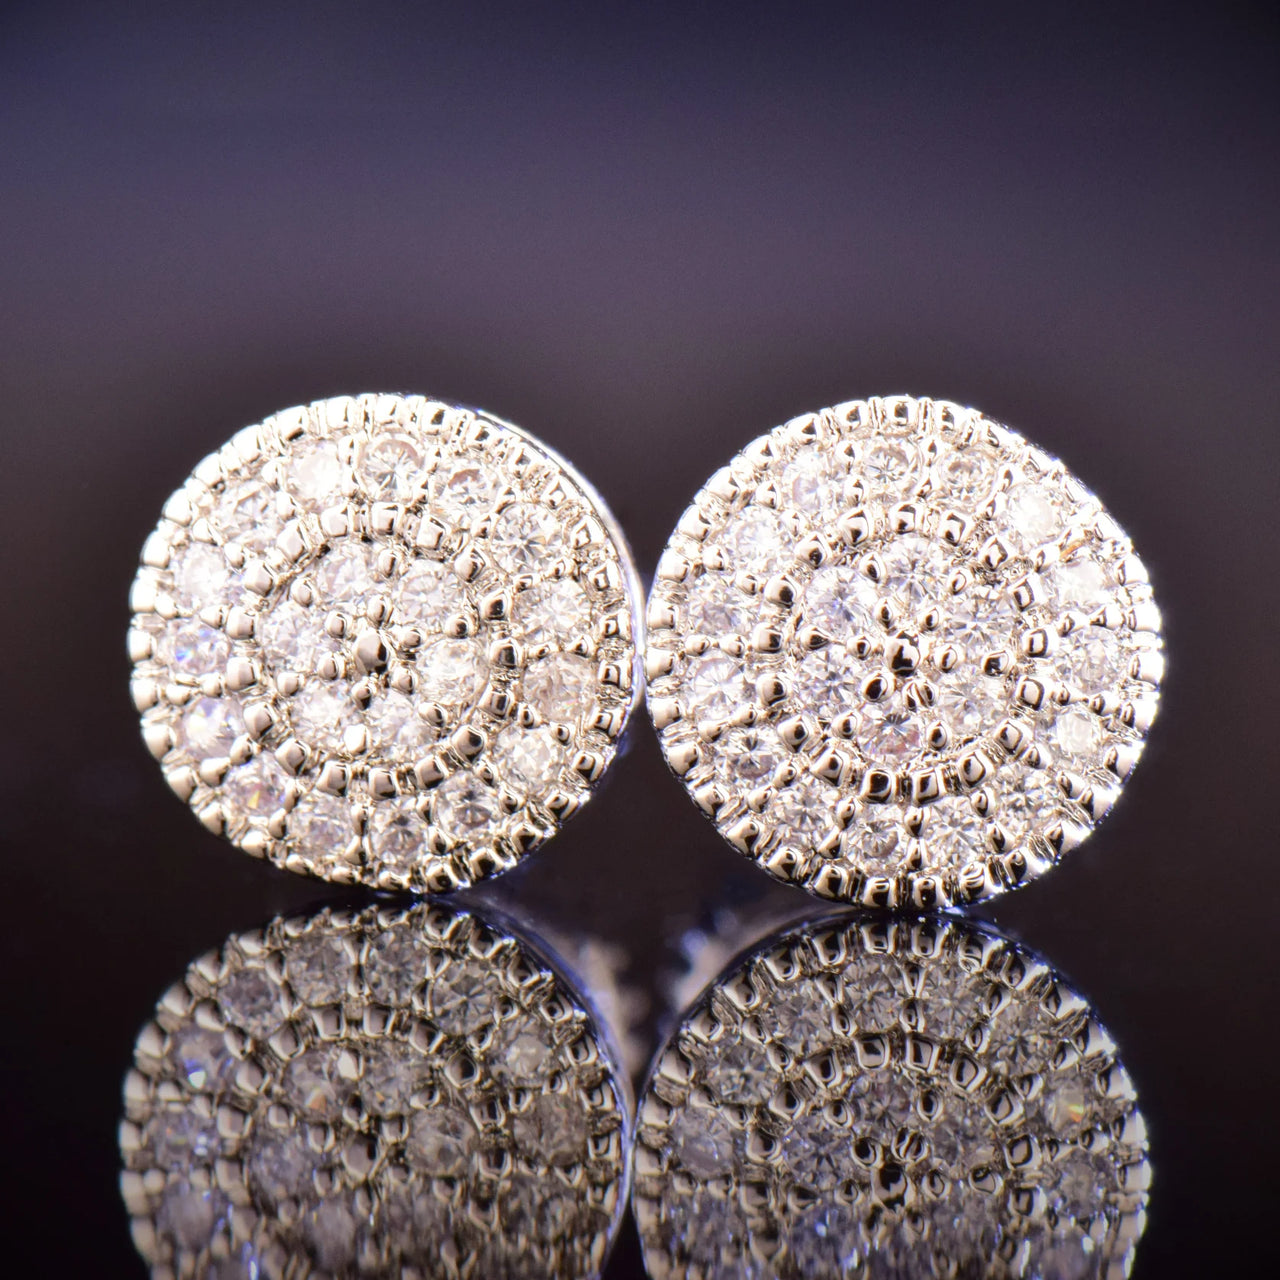 8mm Round Cut Pave Stud Earrings - Different Drips